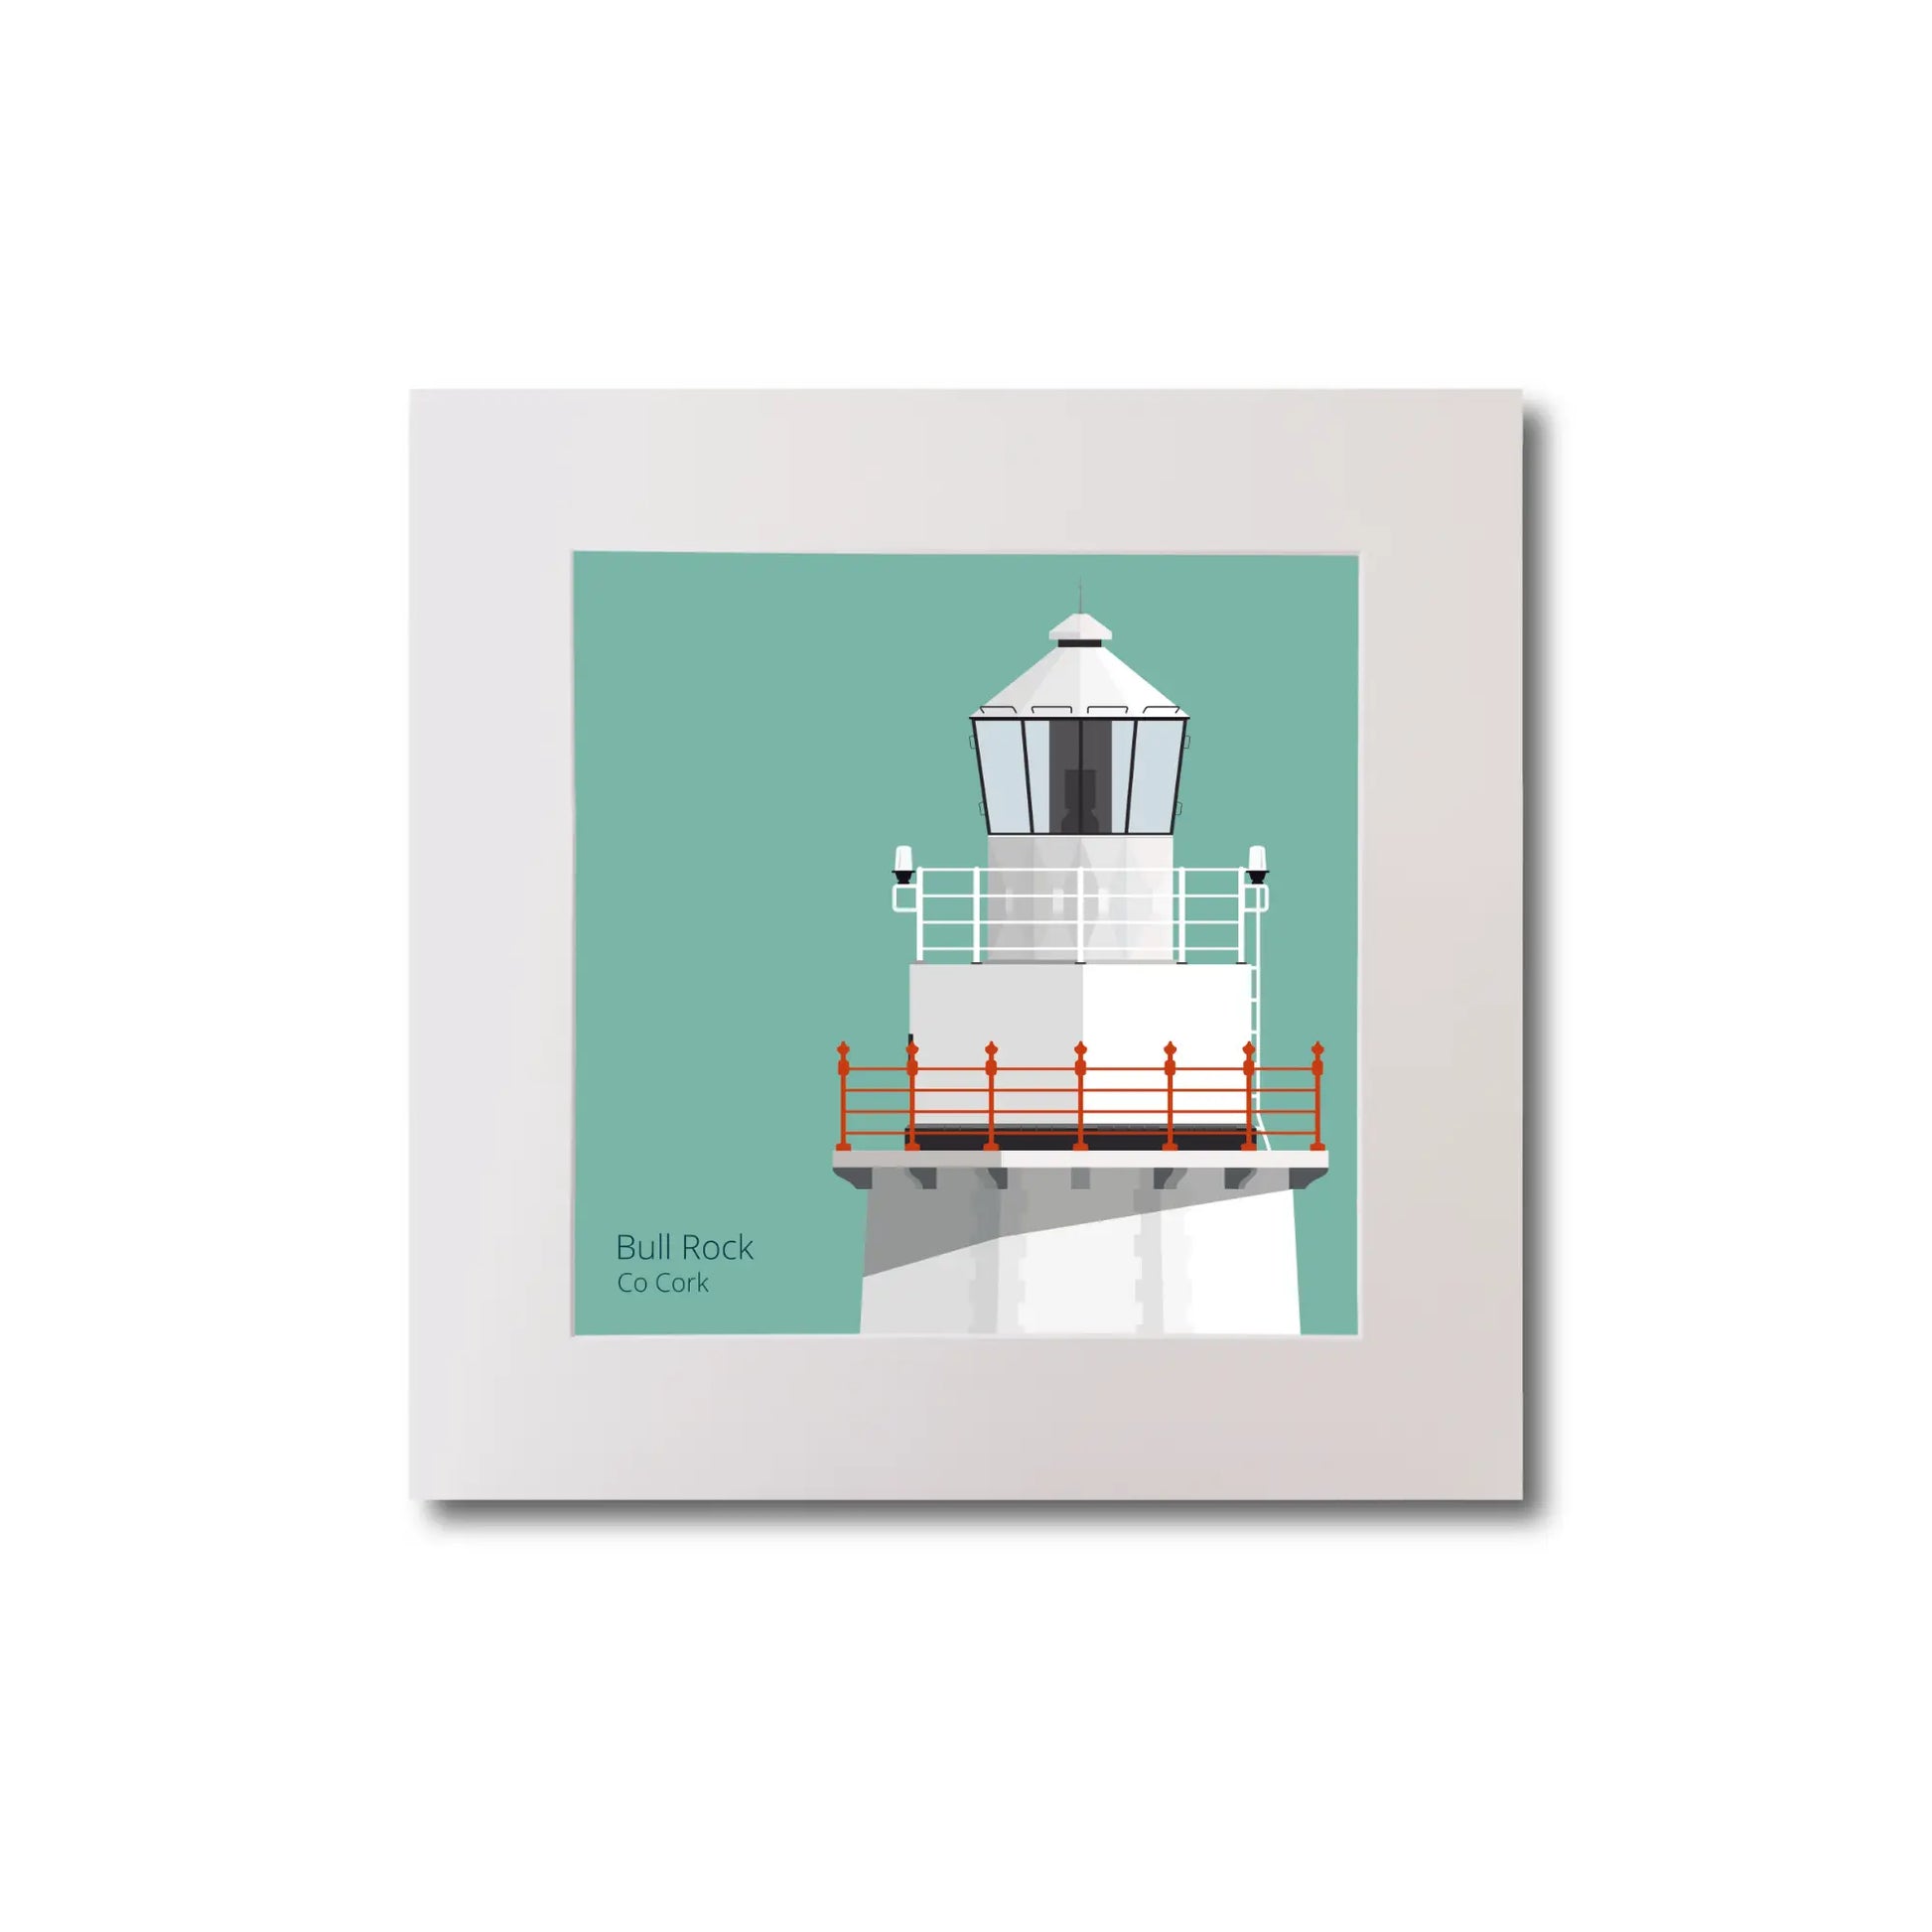 Illustration of Bull Rock lighthouse on an ocean green background, mounted and measuring 20x20cm.